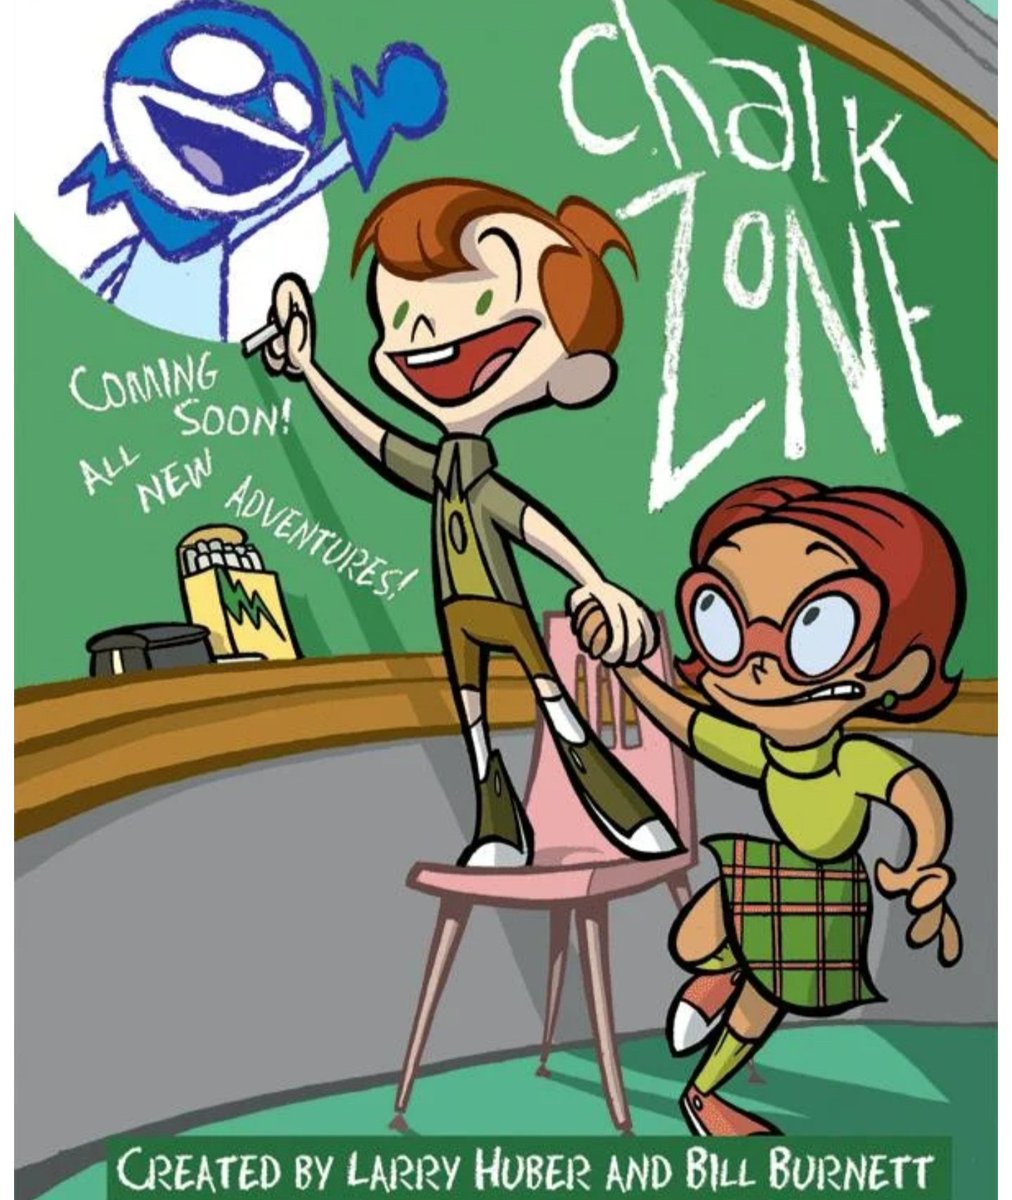 Chalkzone The first season didn't release until two years after the pilots release, they continuesly followed this same pattern long gaps in between seasons the show was canceled and all of season 4 aired at 6am until they stopped airing the show all together